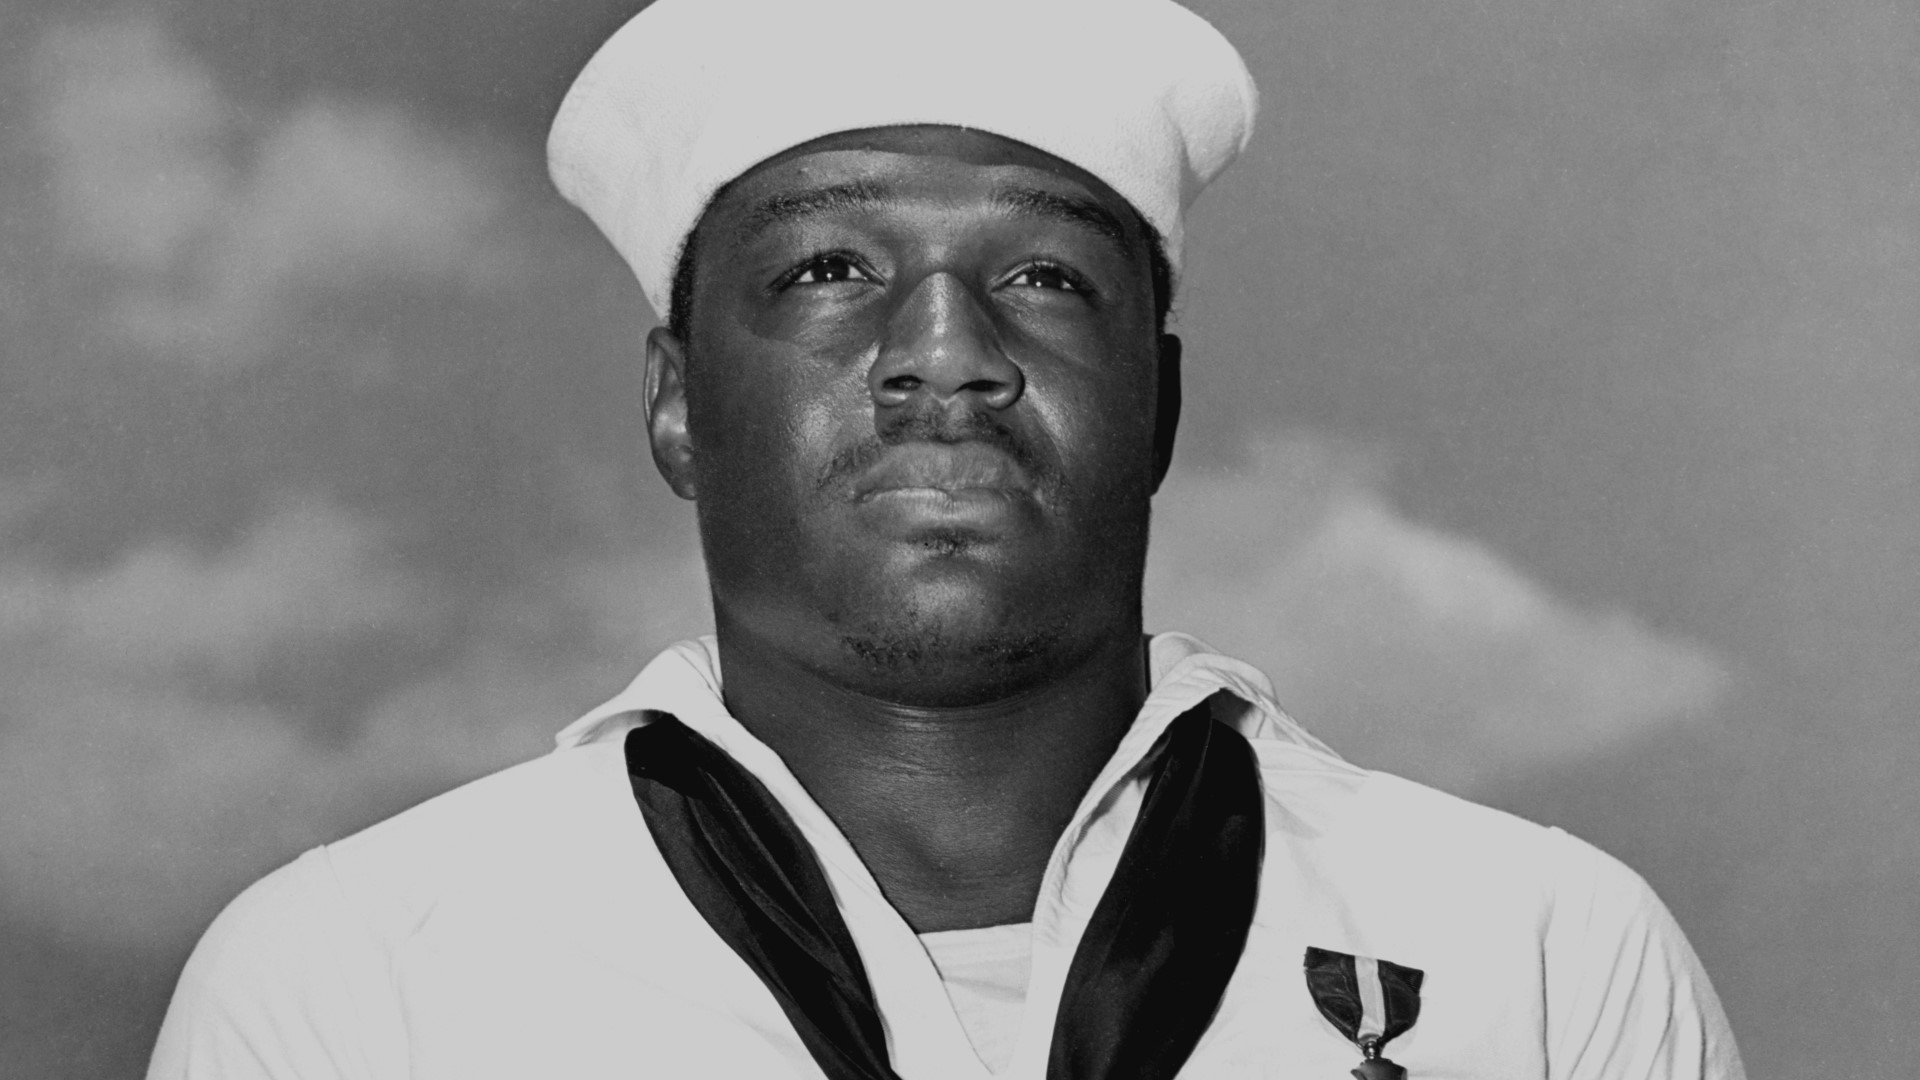 Doris Miller died while serving on a ship that was torpedoed by a Japanese submarine in November 1943.